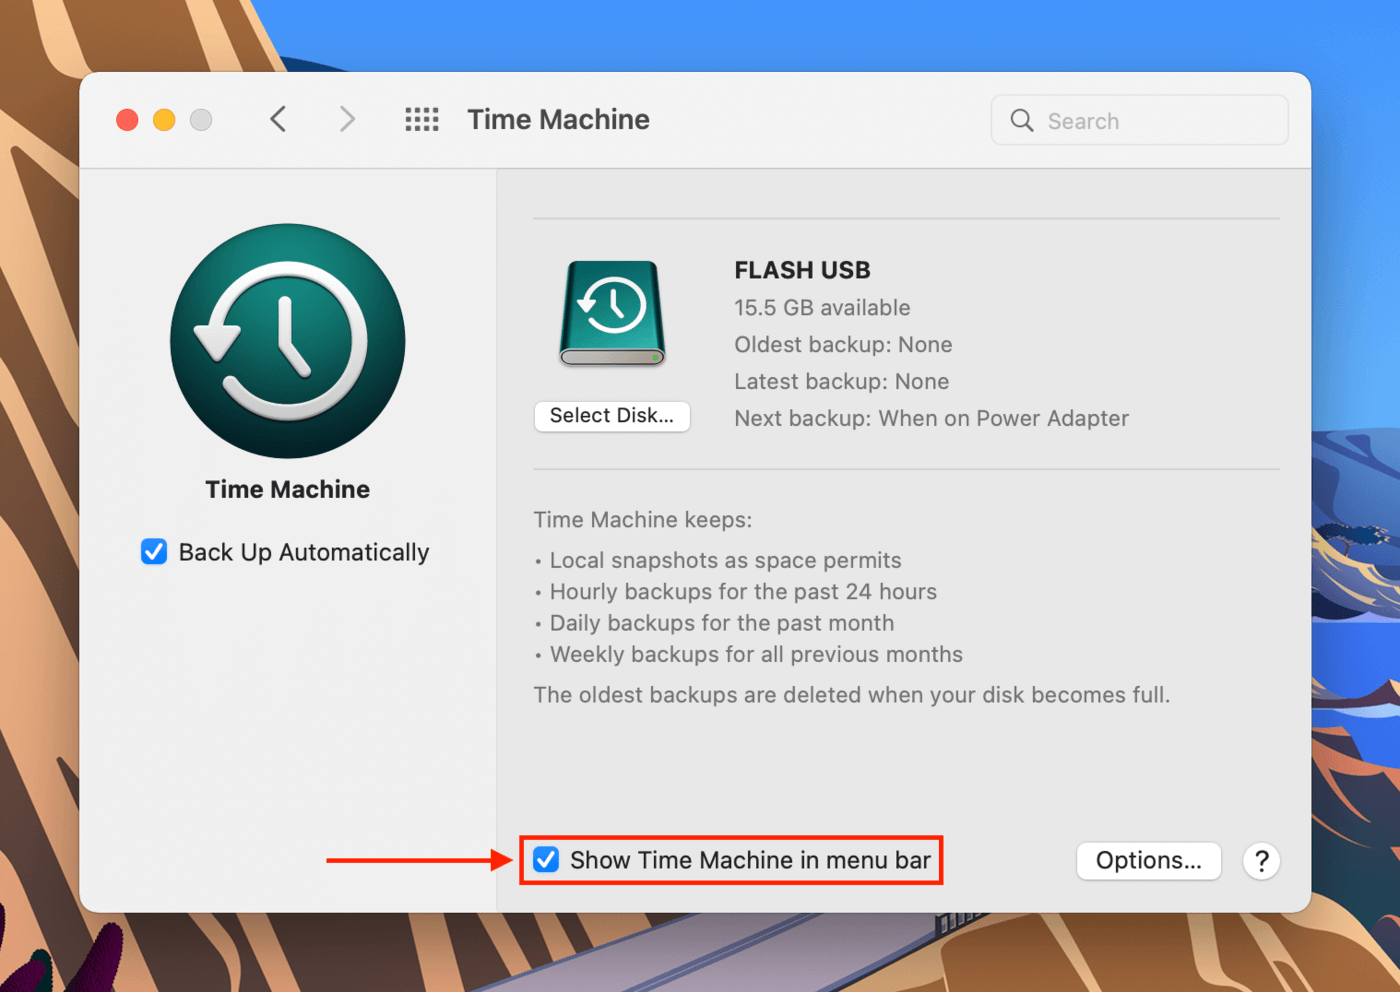 Time Machine settings window in System Preferences